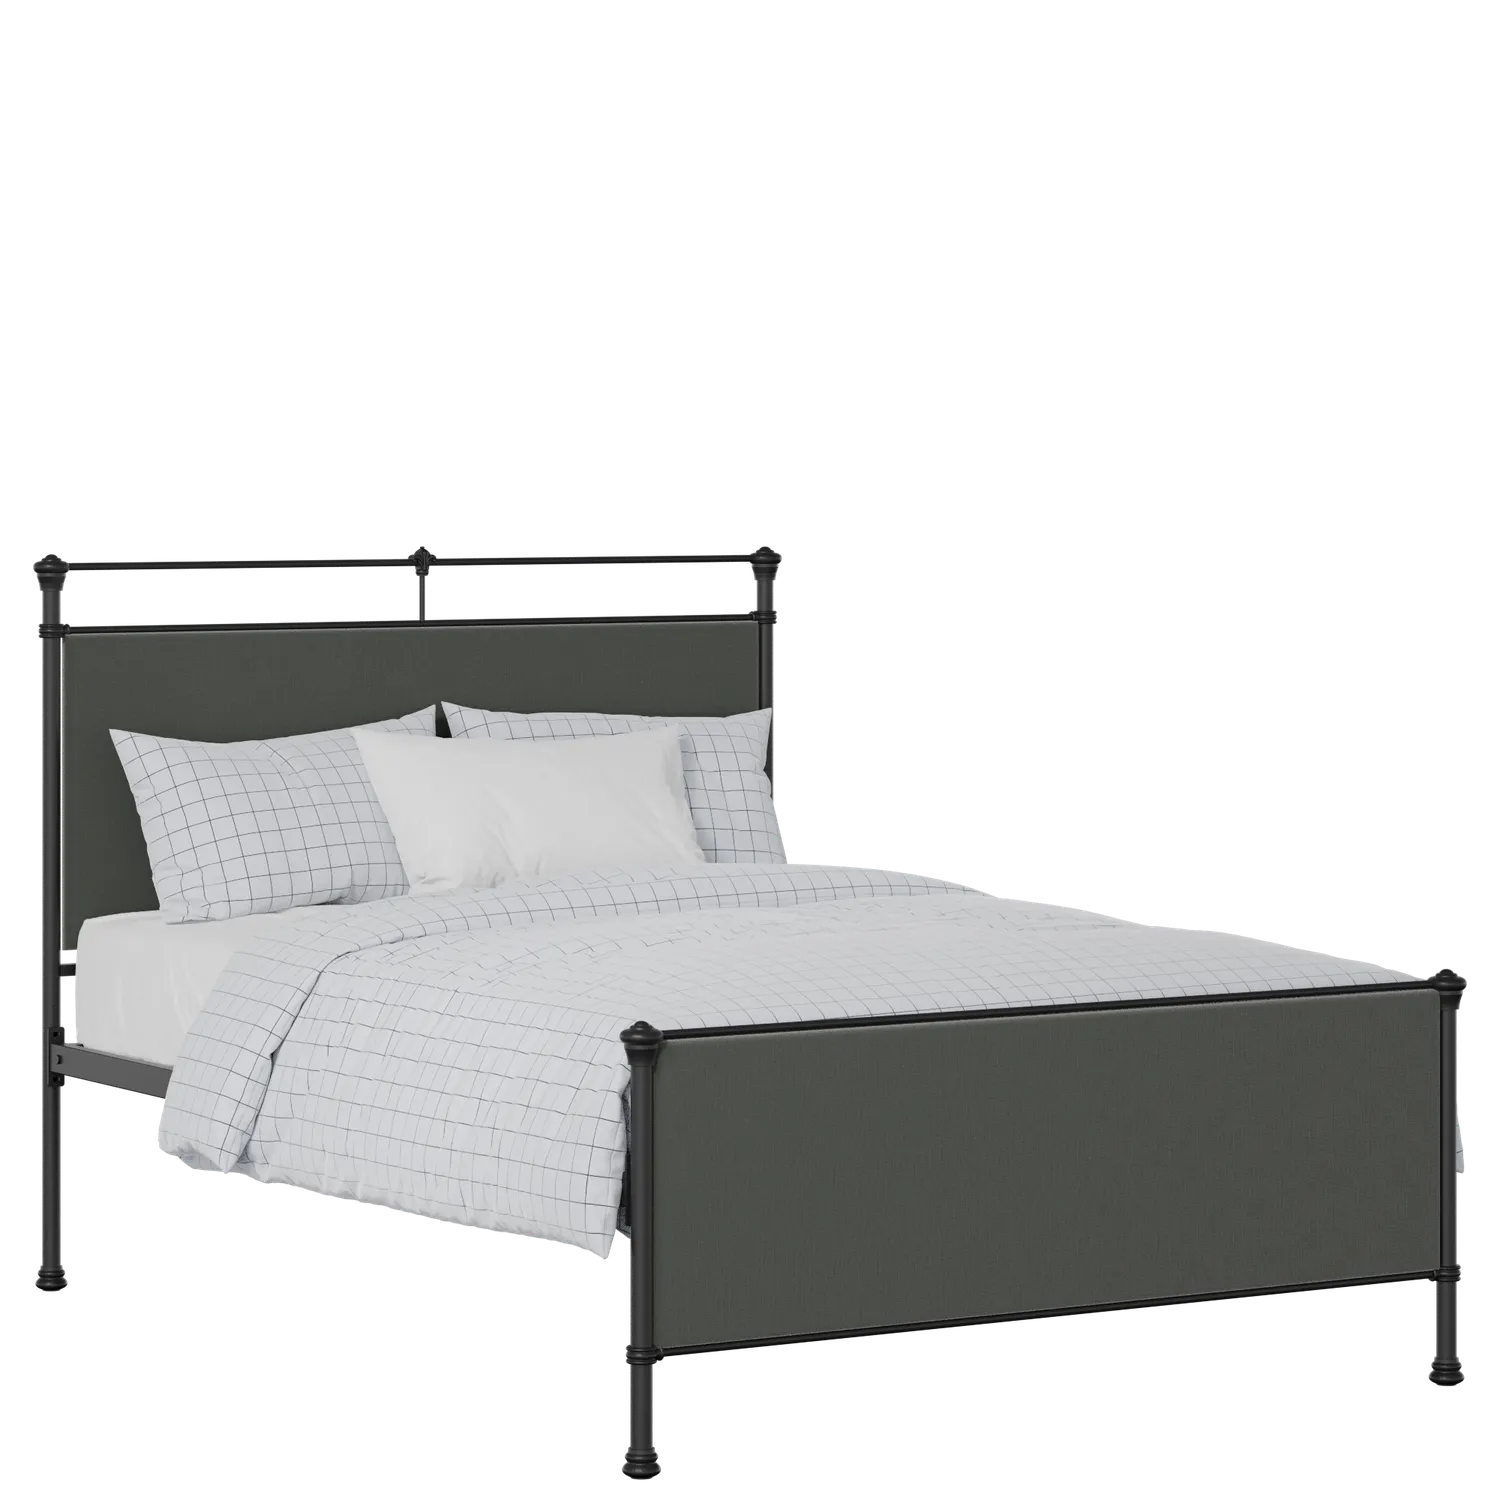 Nancy iron/metal upholstered bed in black with iron fabric